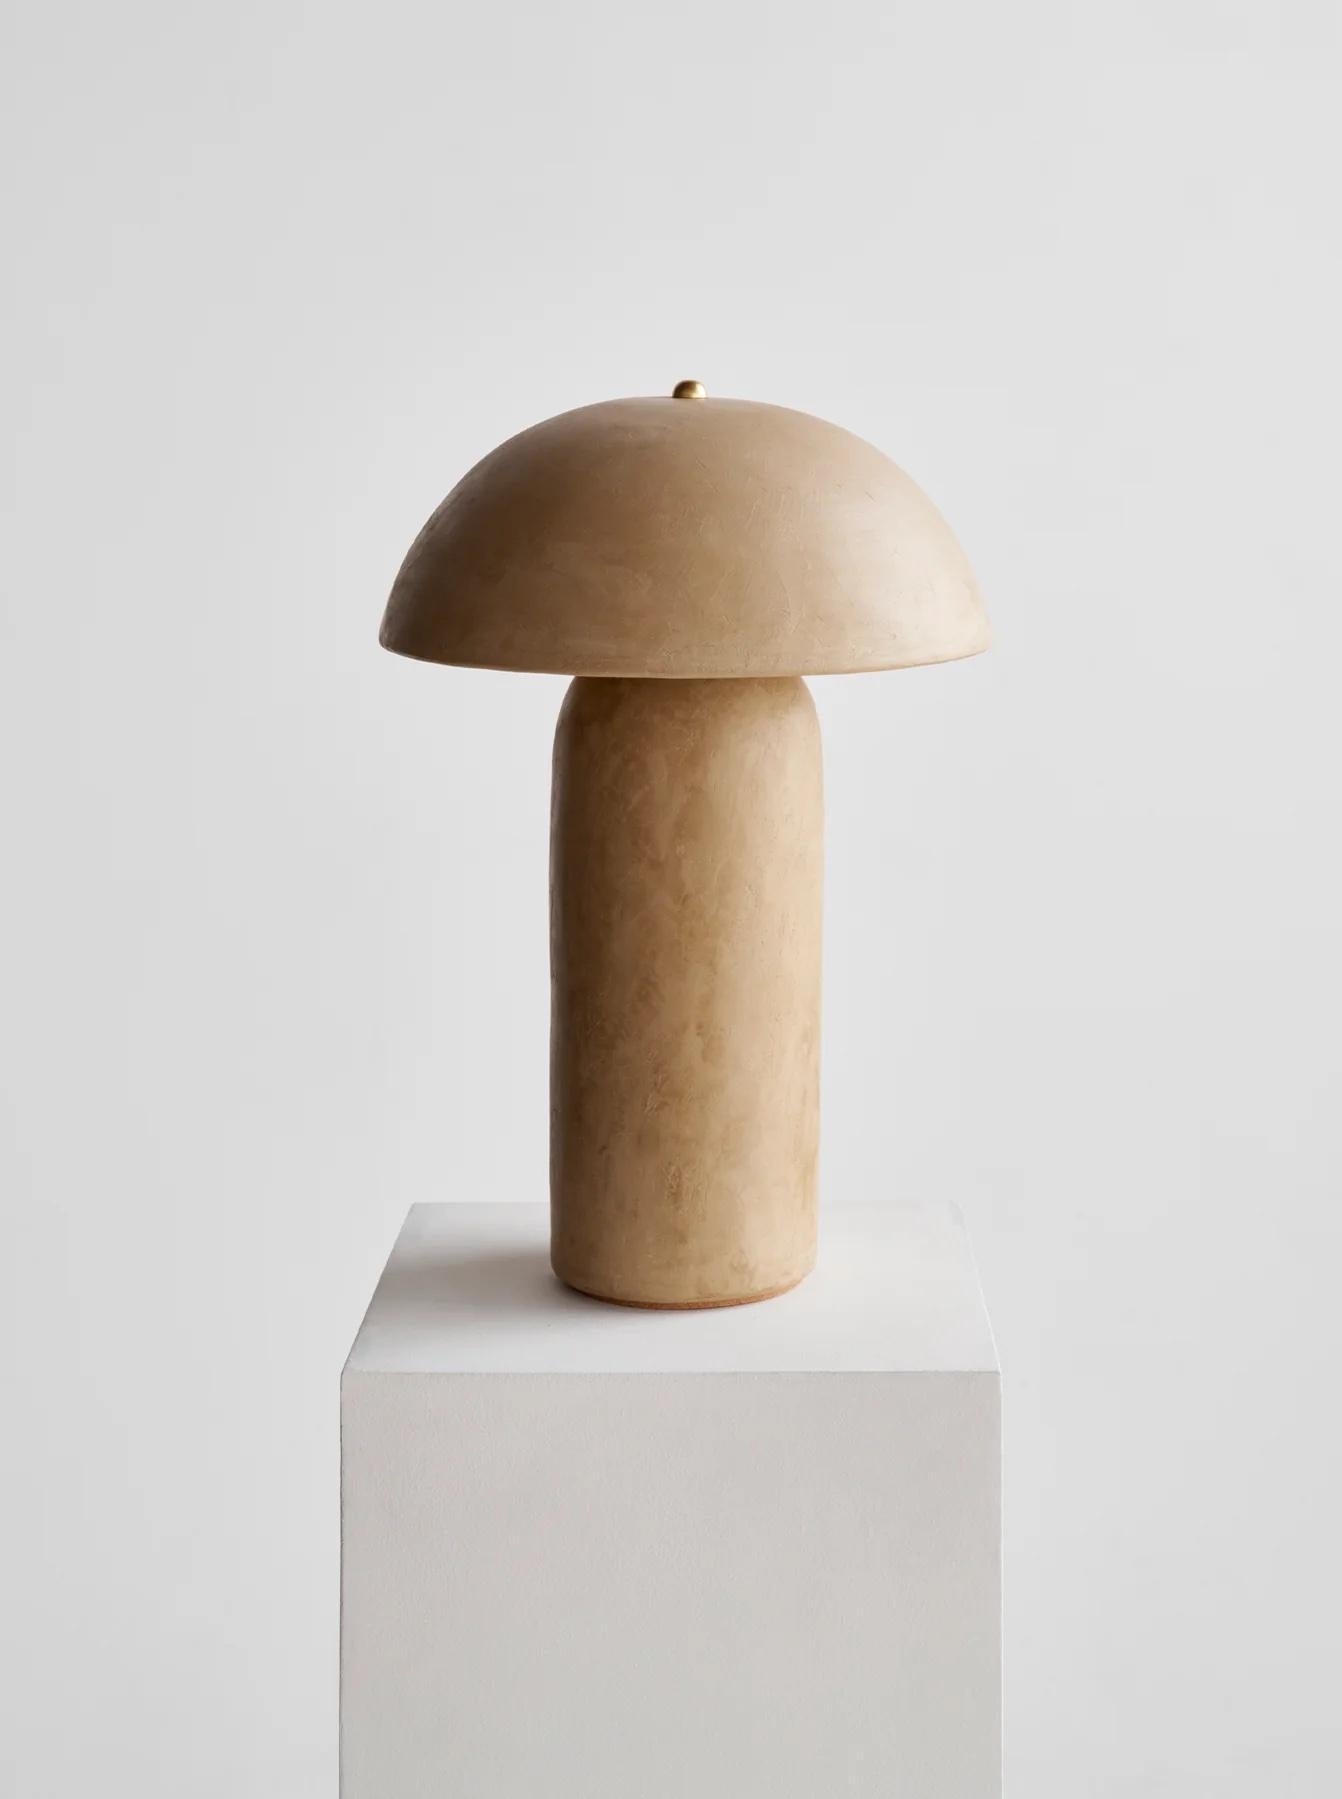 Contemporary Large Tera Lamp in White Lime Plaster by Ceramicah For Sale